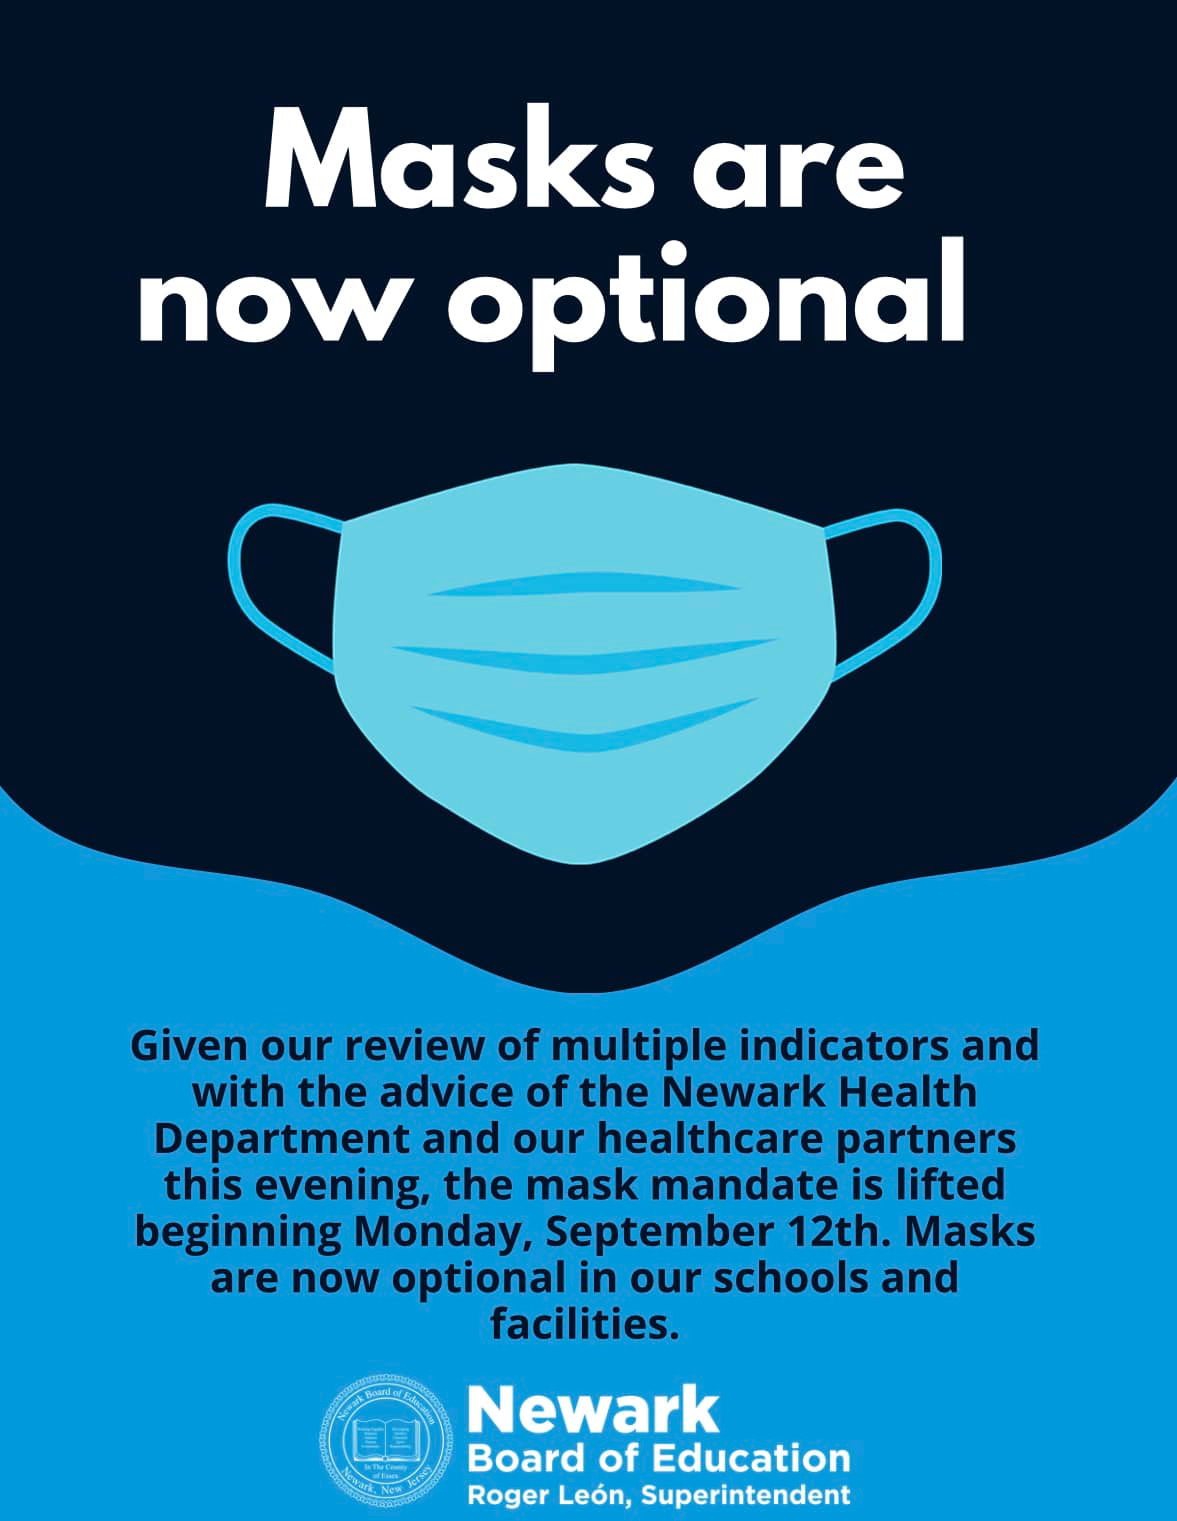 May be an image of text that says 'Masks are now optional Given our review of multiple indicators and with the advice of the Newark Health Department and our healthcare partners this evening, the mask mandate is lifted beginning Monday, September 12th. Masks are now optional in our schools and facilities. Newark Board of Education Roger León, Superintendent'